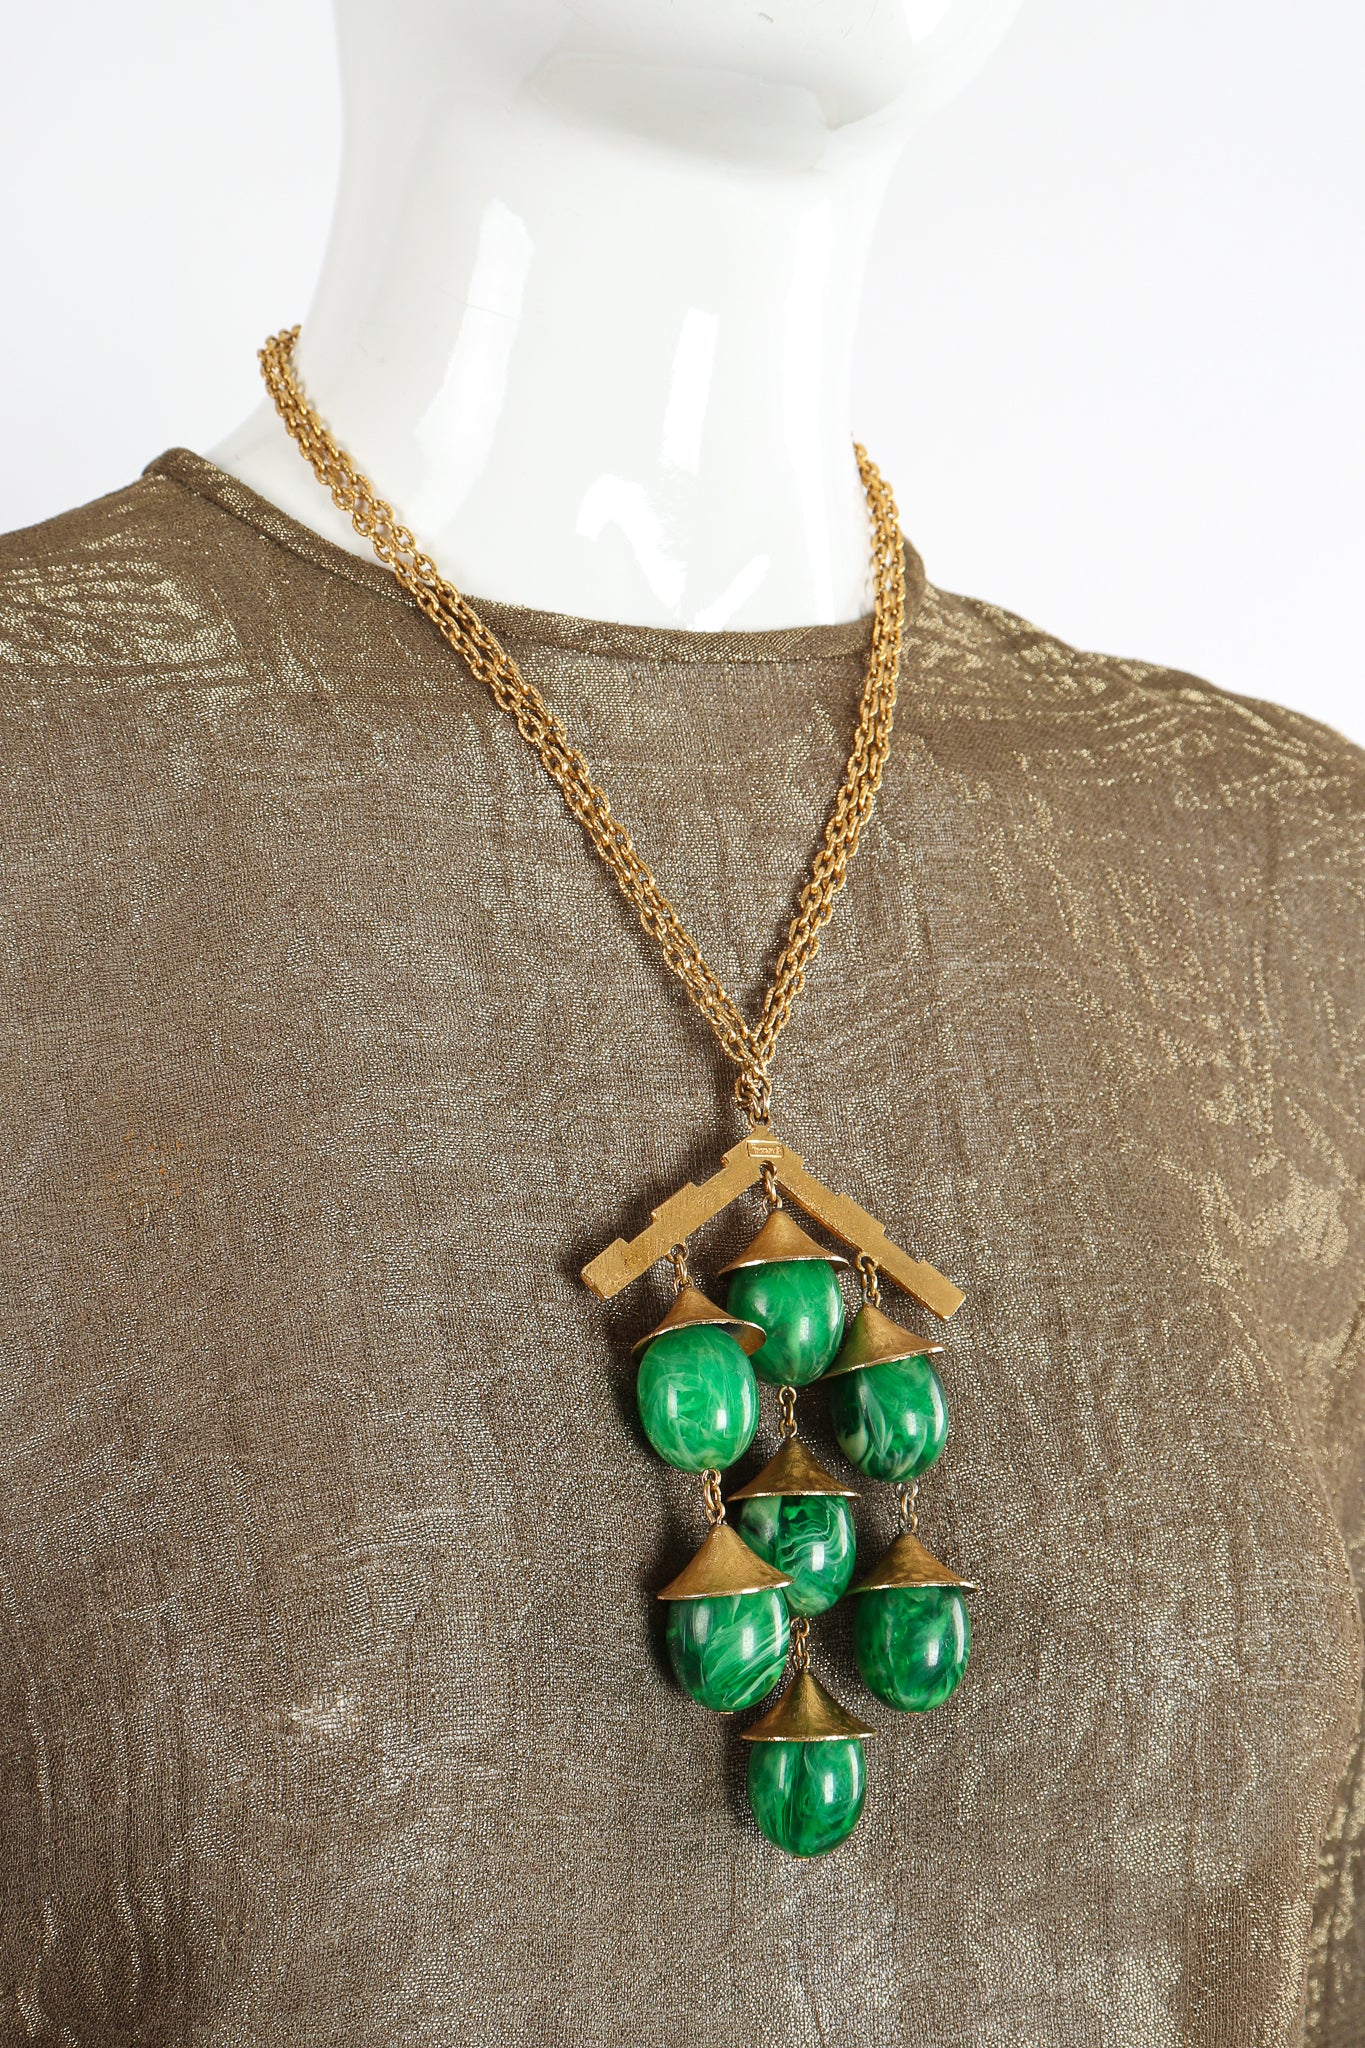 Vintage Trifari Faux Malachite Pagoda Bell Pendant Necklace on Mannequin at Recess Los Angeles